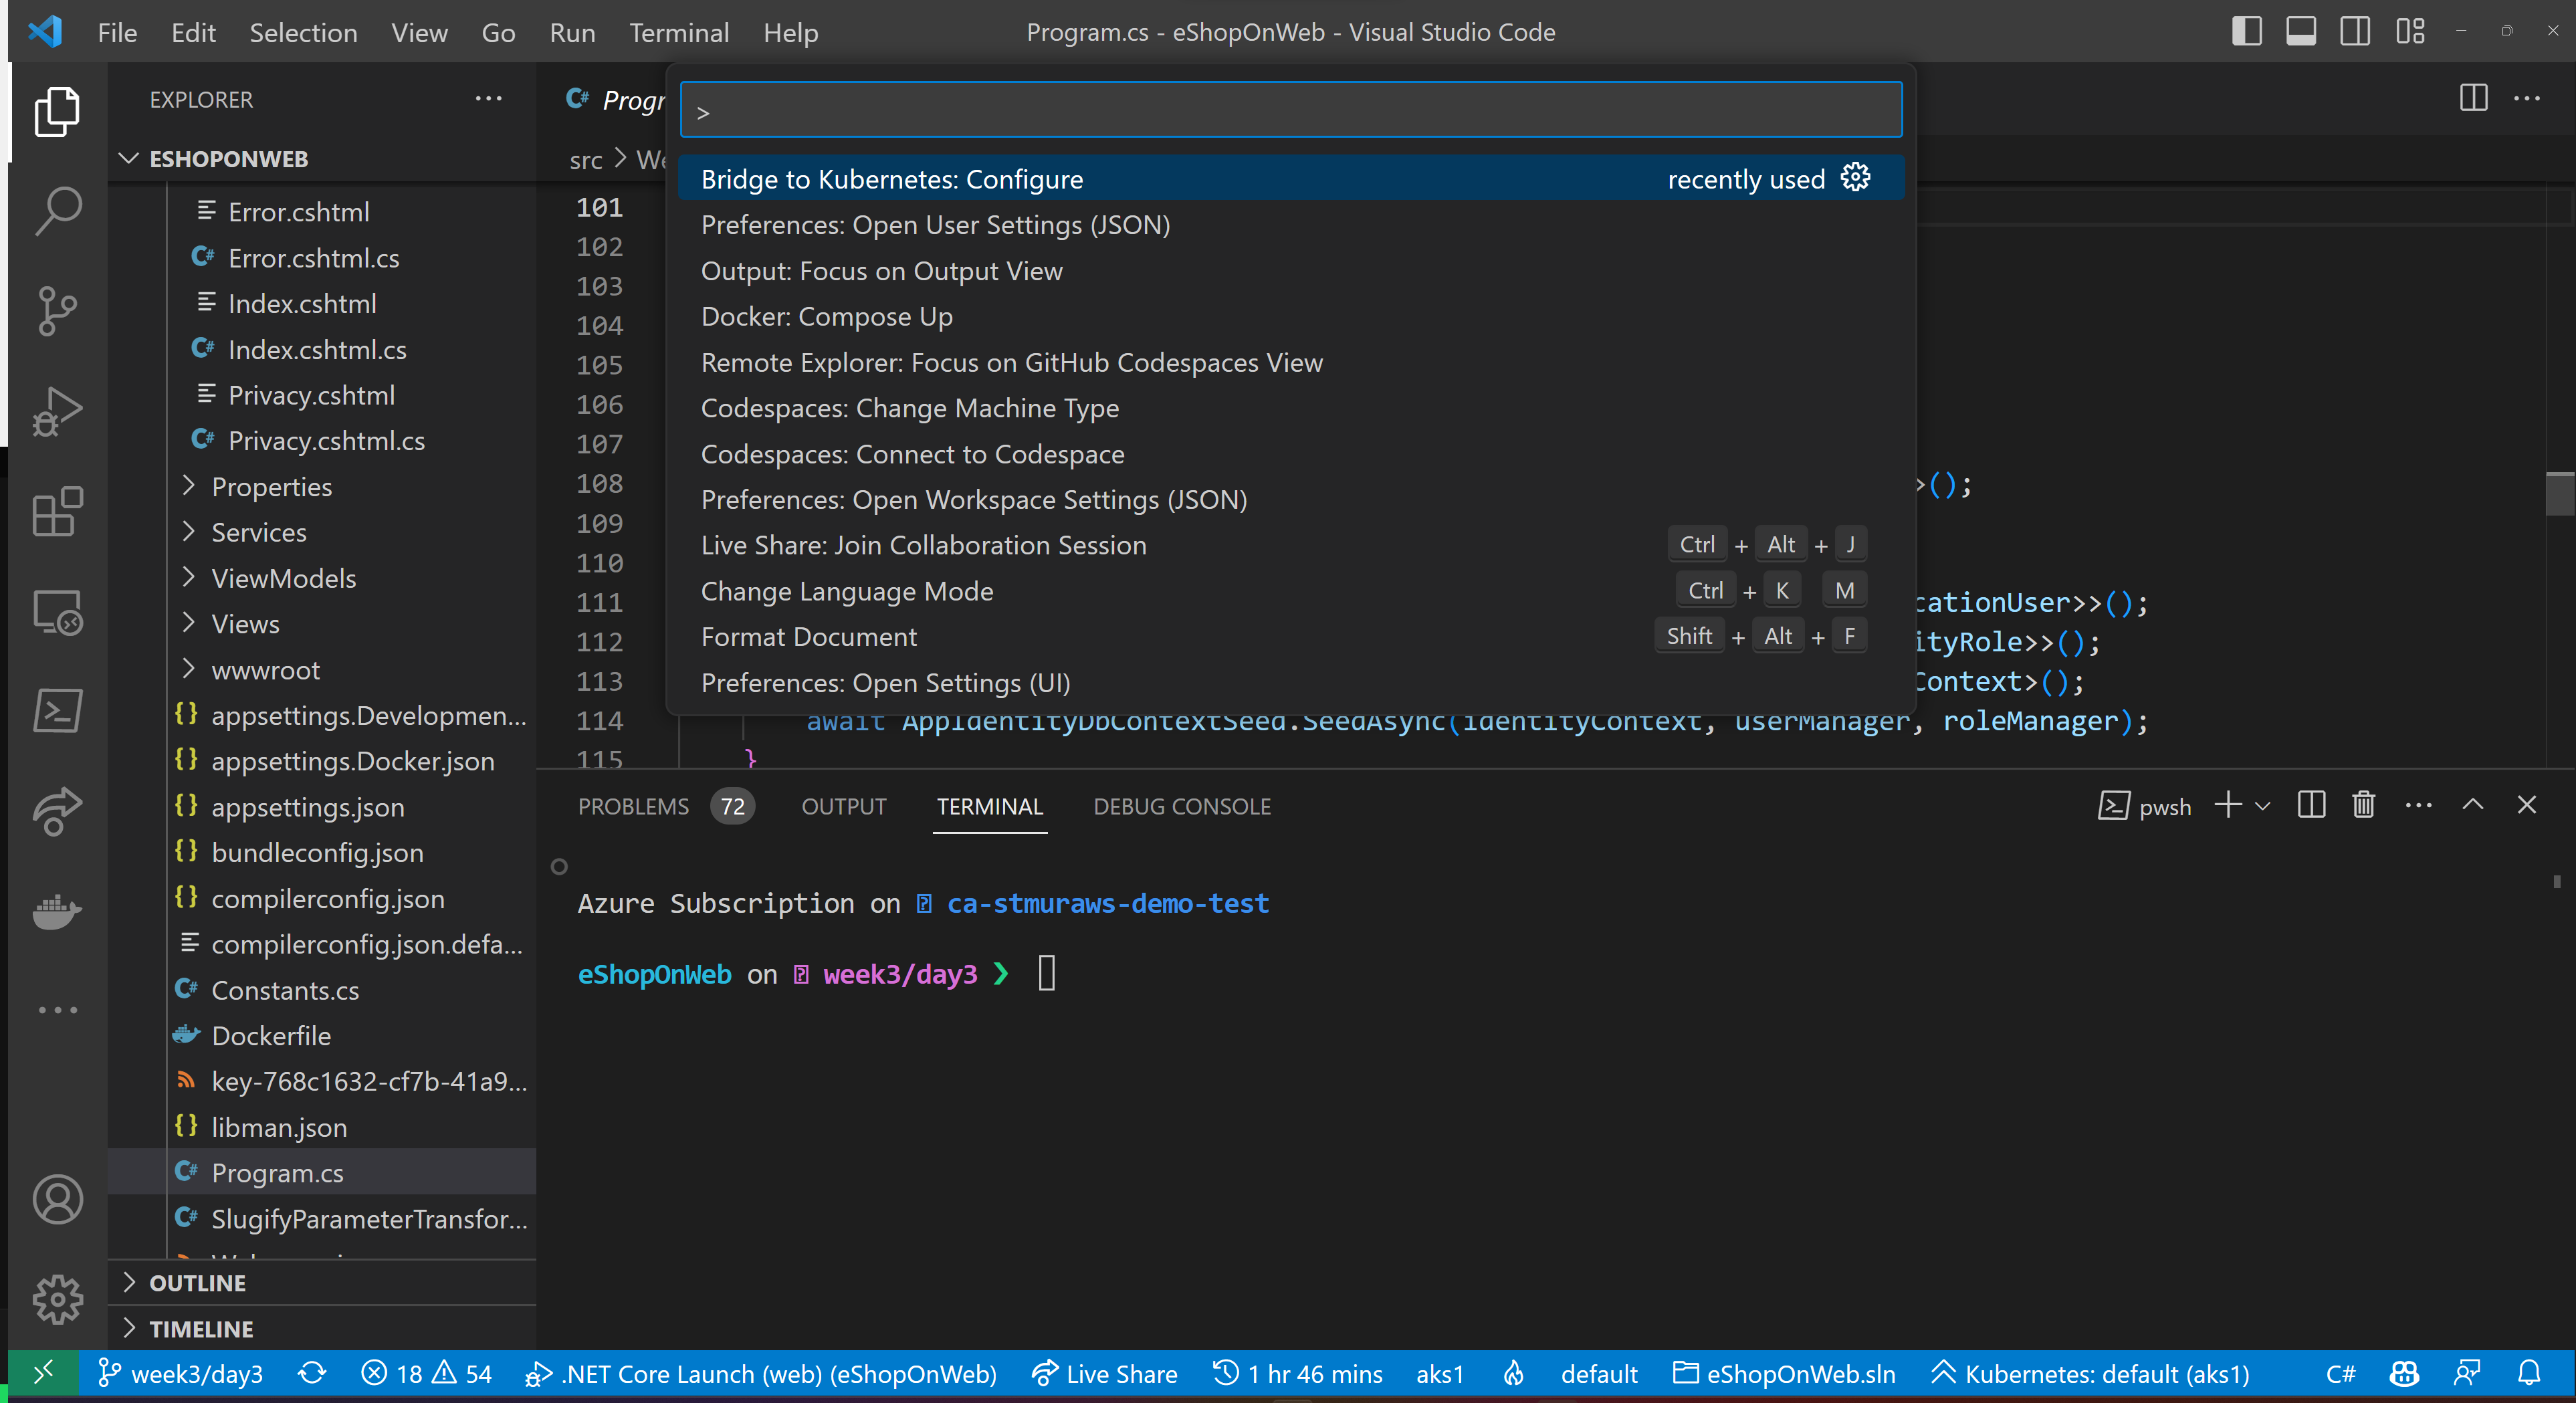 The command palette for Visual Studio Code is open and the first item is Bridge to Kubernetes: Configure